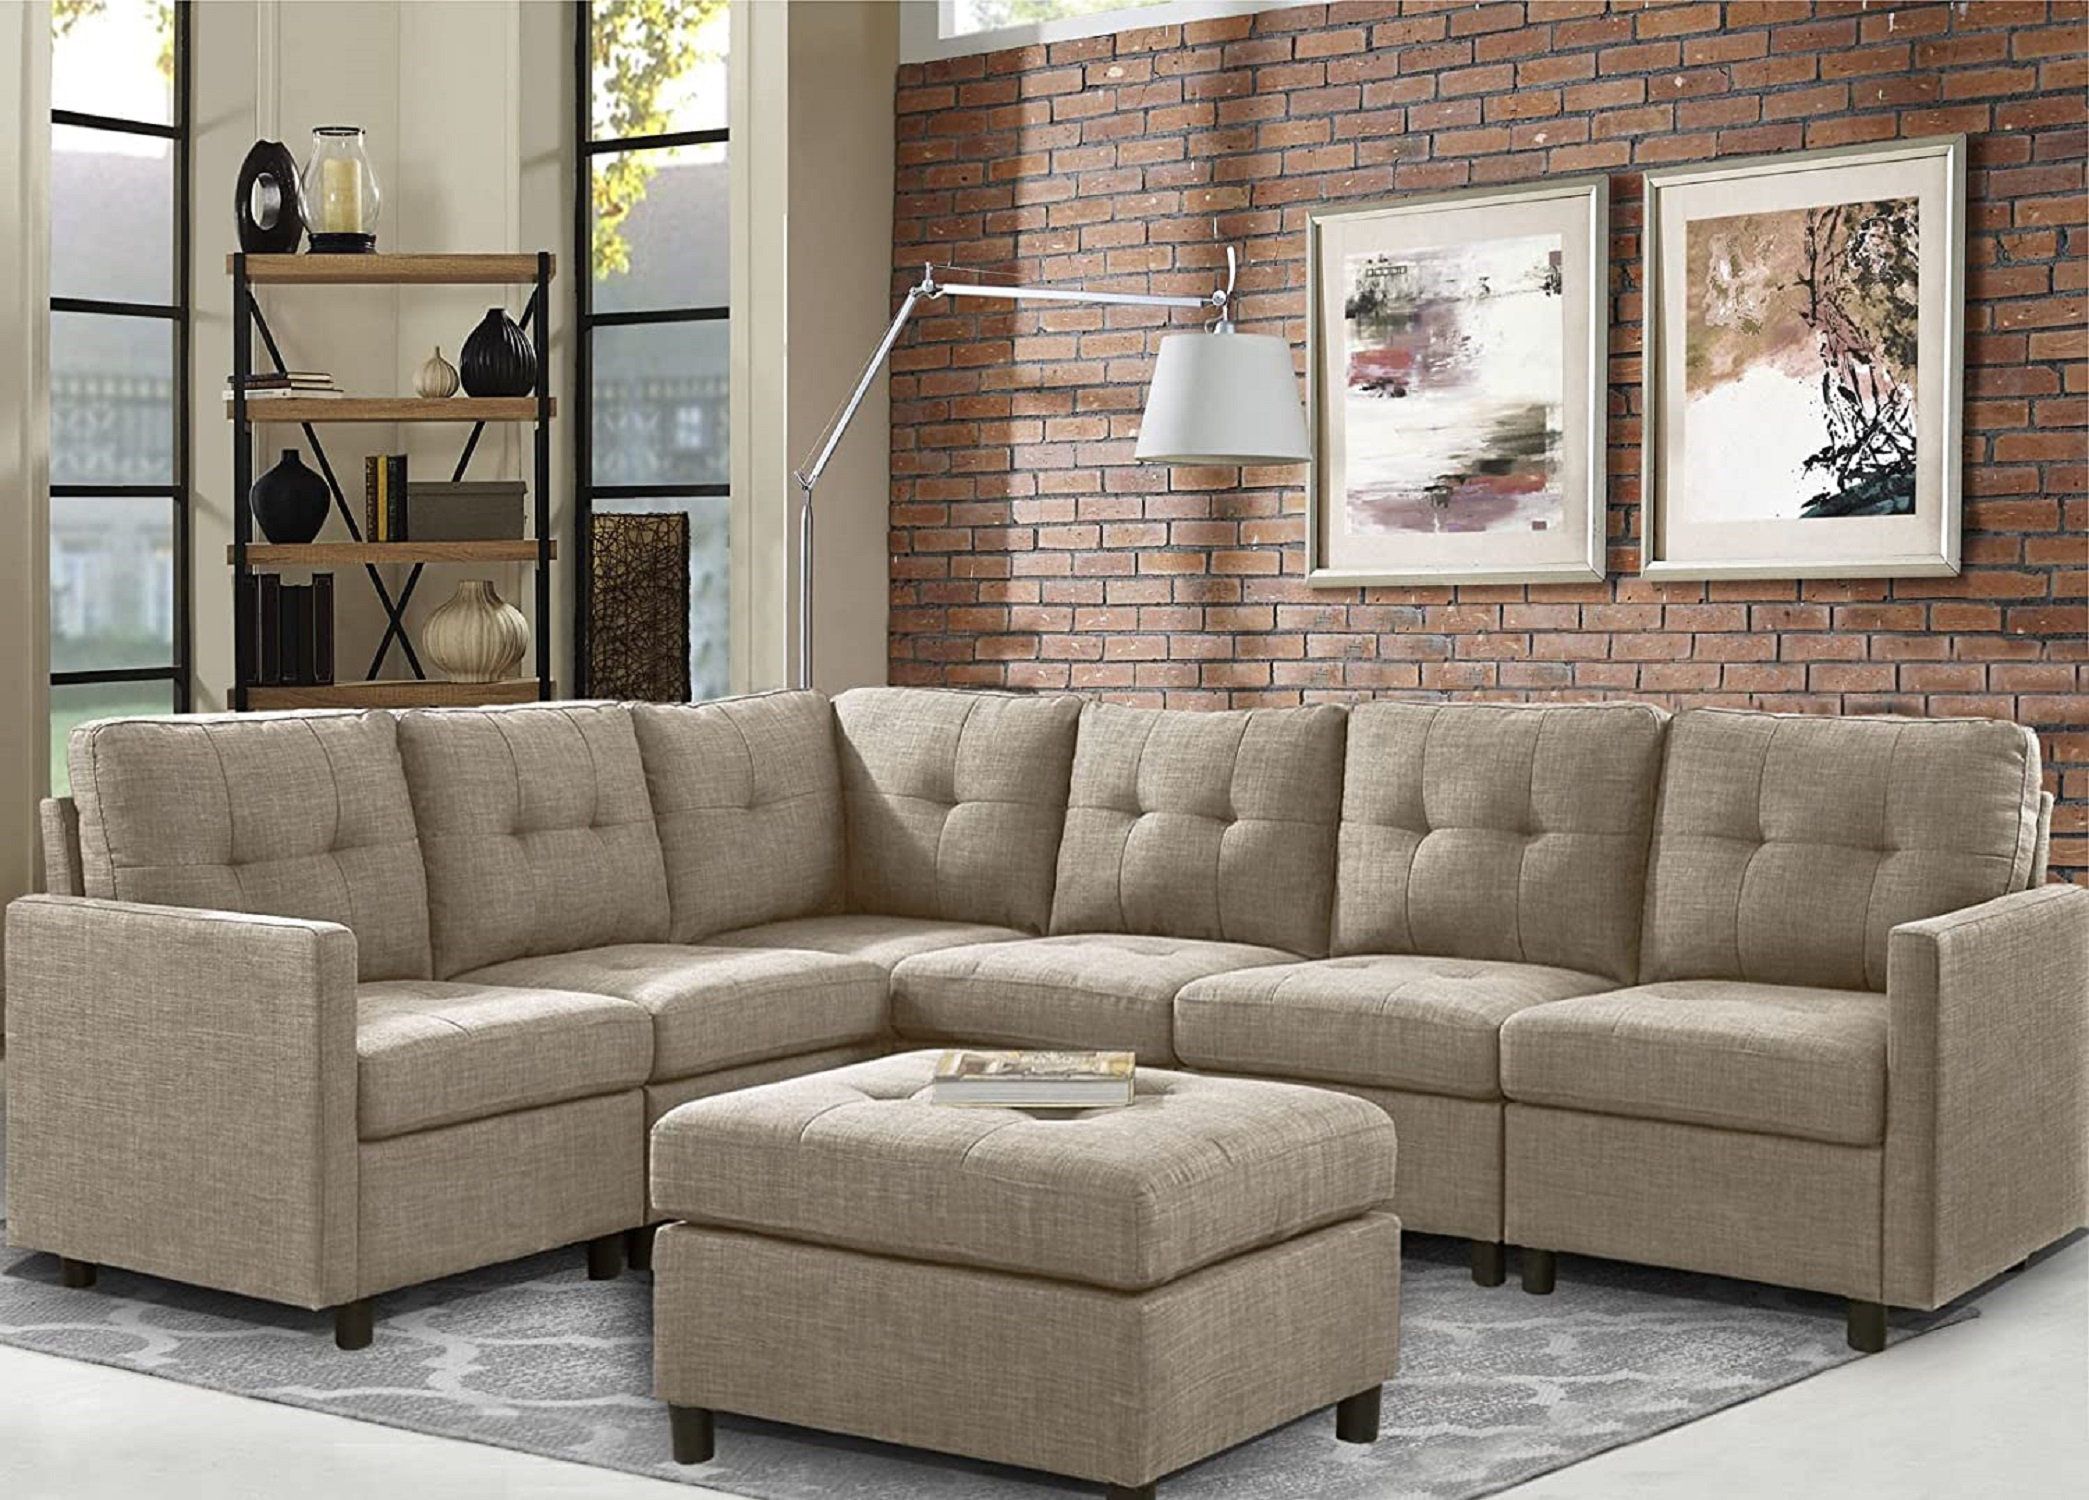 Latitude Run® Modular Sofa & Chaise With Ottoman | Wayfair Pertaining To Sectional Sofas With Ottomans And Tufted Back Cushion (View 5 of 15)